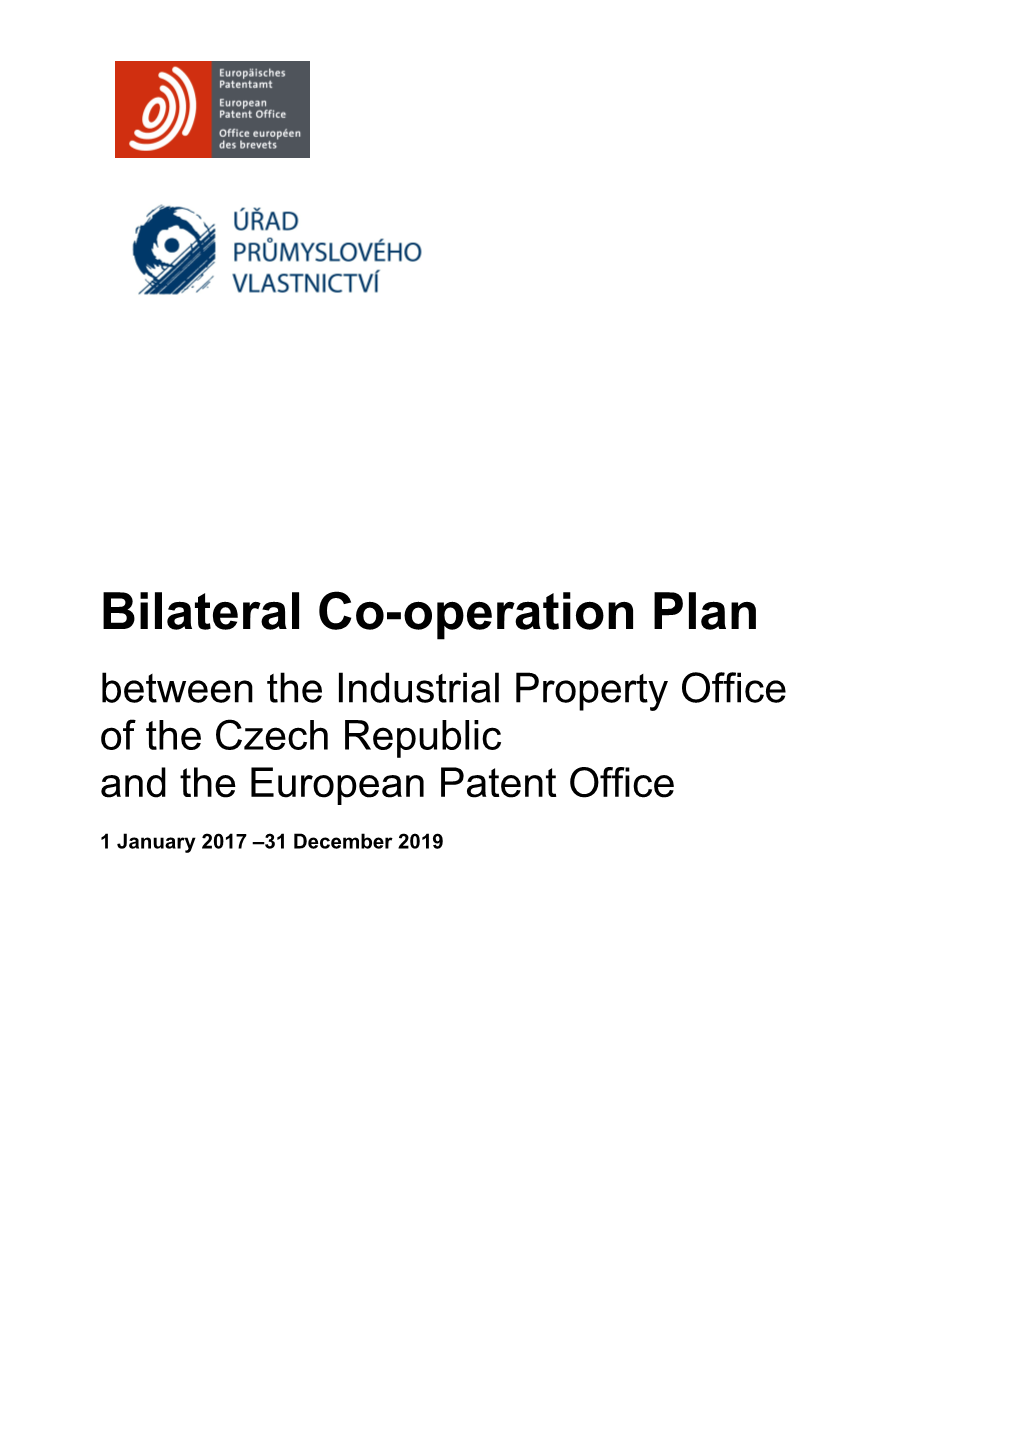 Bilateral Co-Operation Plan